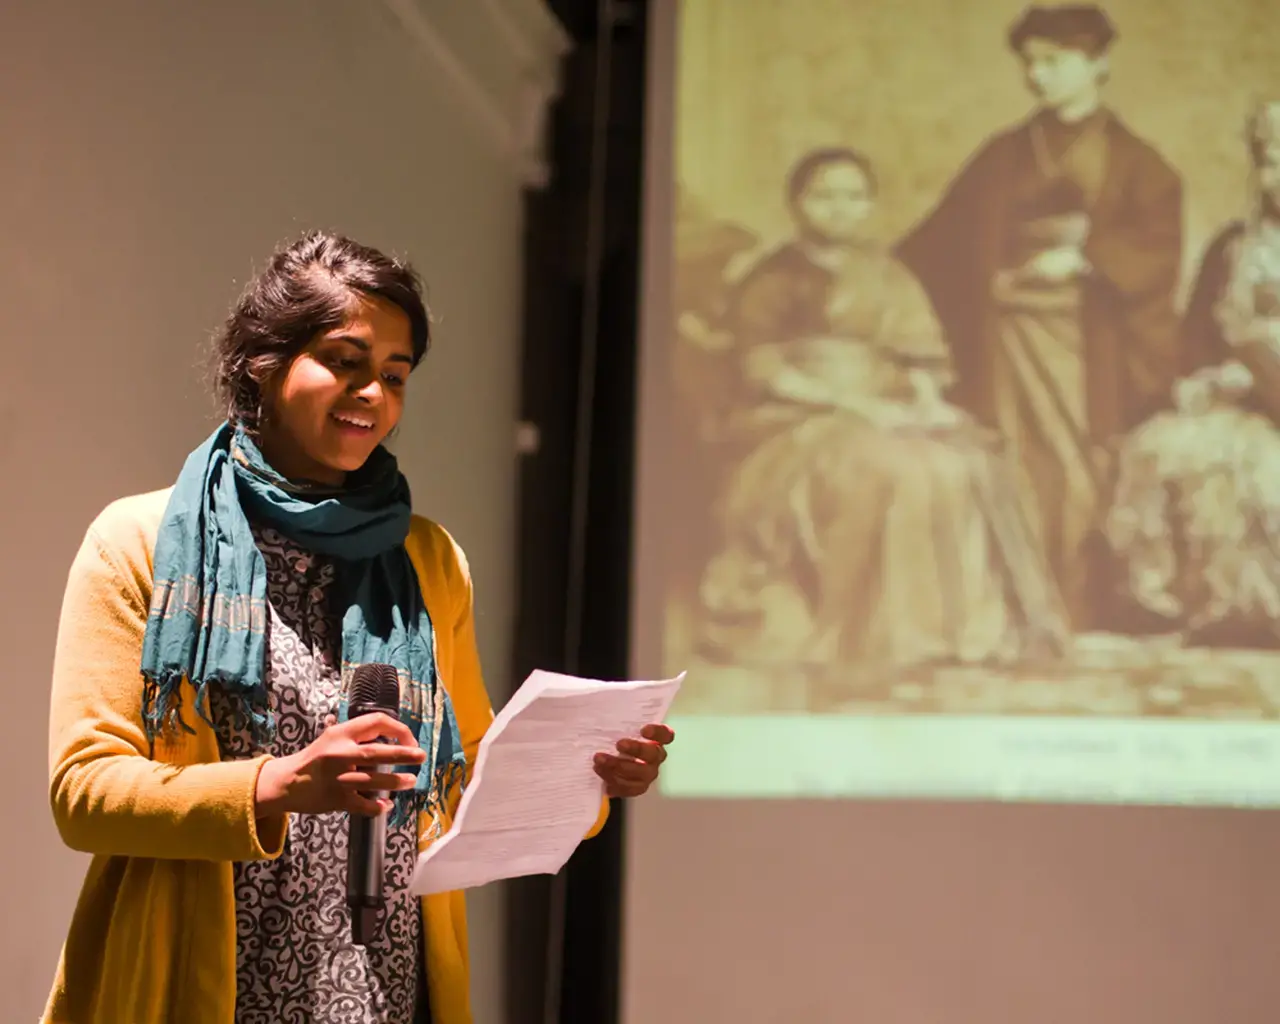 South Asian American Digital Archive, Pavi Jaisankar speaks at a SAADA Community Forum at the Asian Arts Initiative in front of a photograph of Dr. Anandibai Joshee, the first South Asian woman to earn a degree in Western medicine, 2013. Photo by Vivek G. Bharathan.